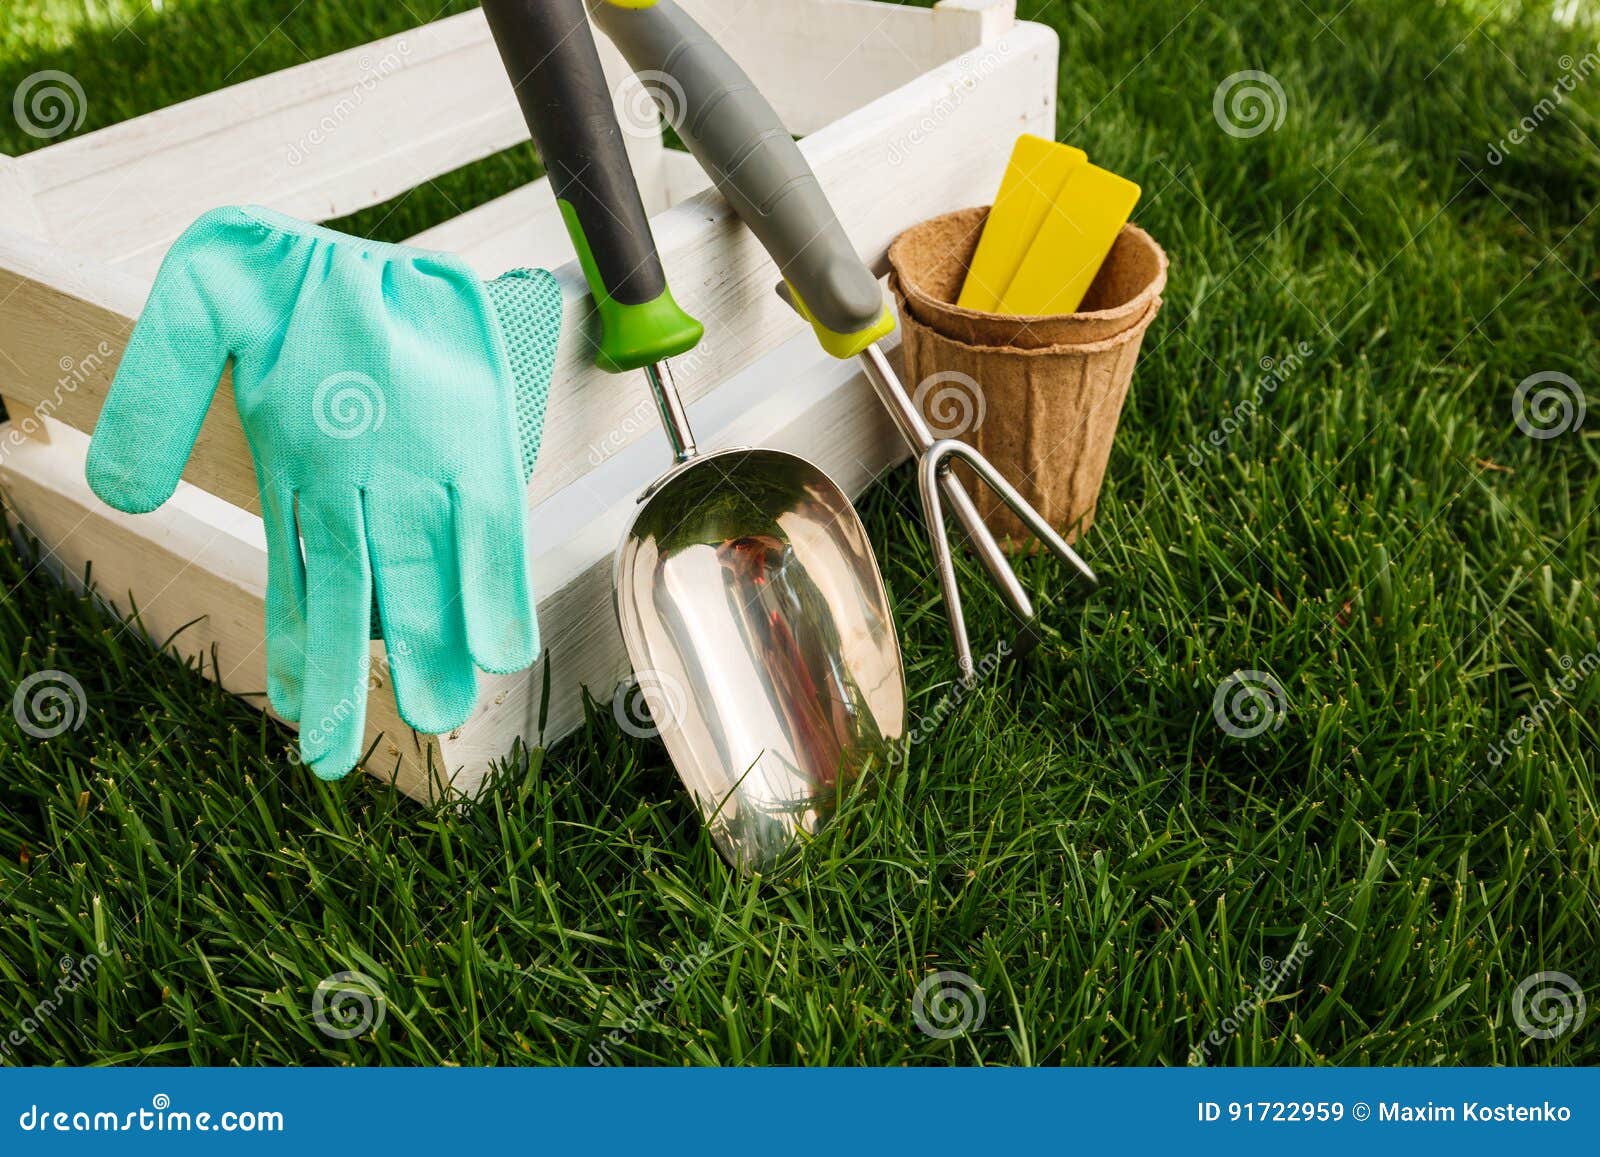 Gardening Tools and Equipment Closeup in the Backyard. Stock Image ...